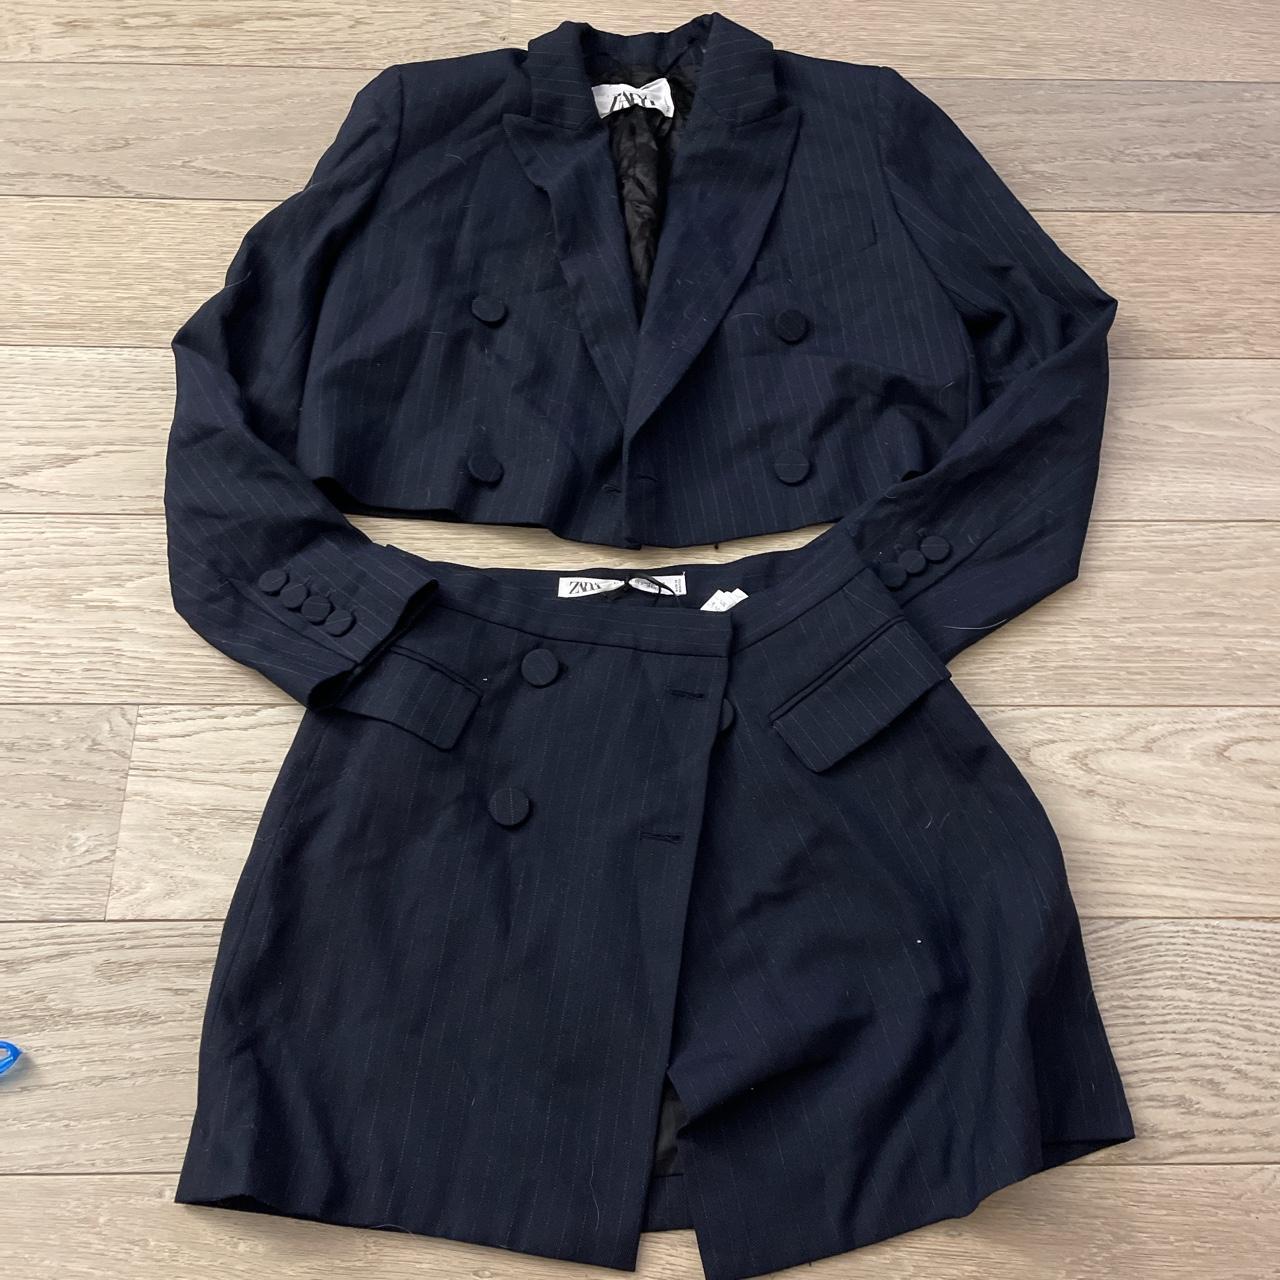 Zara Two-Piece Cropped Suit Set In great condition,... - Depop